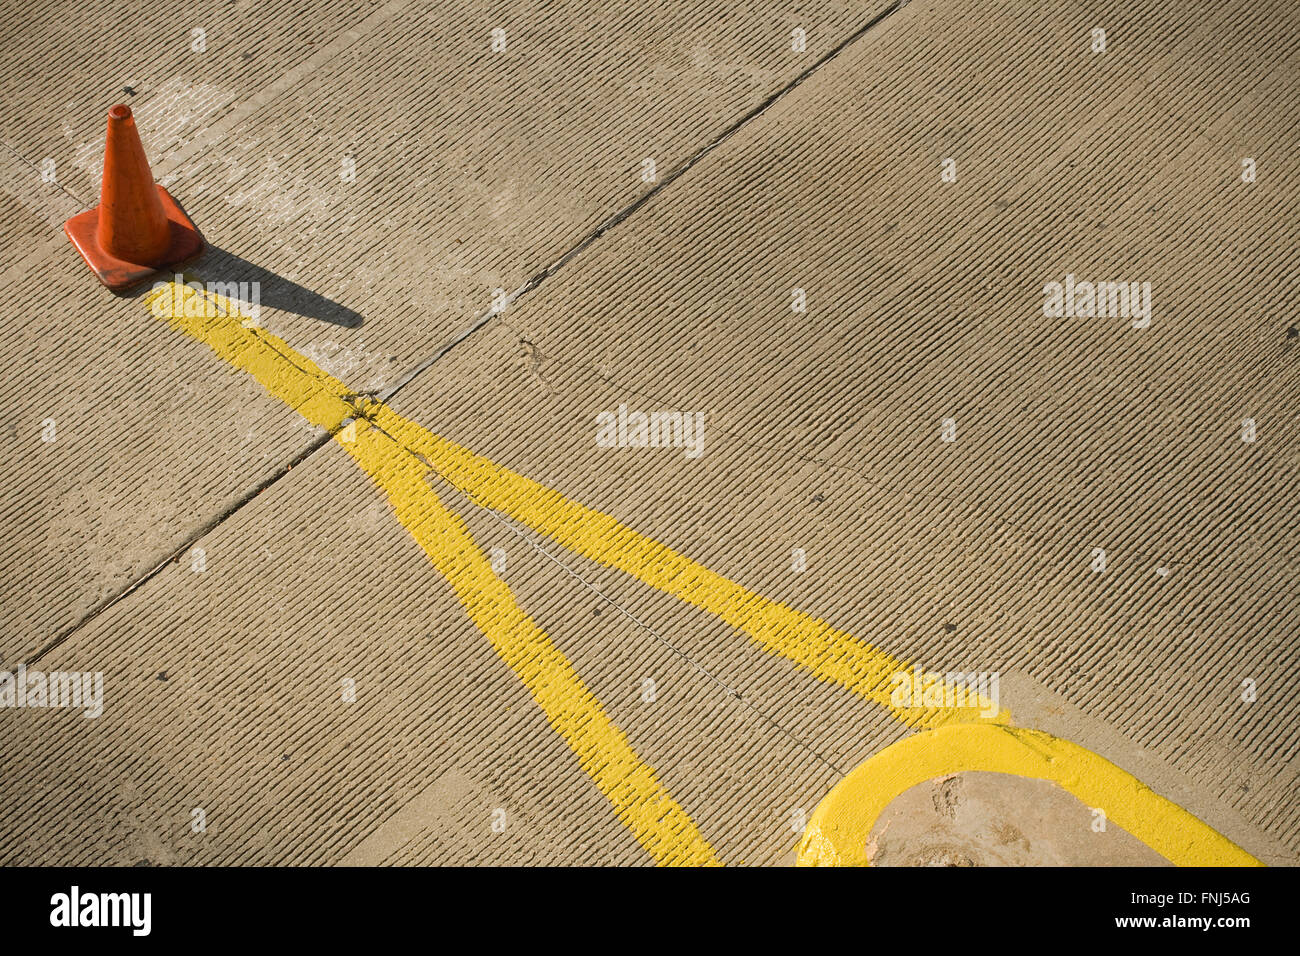 Orange traffic cone and yellow lines in parking lot Stock Photo